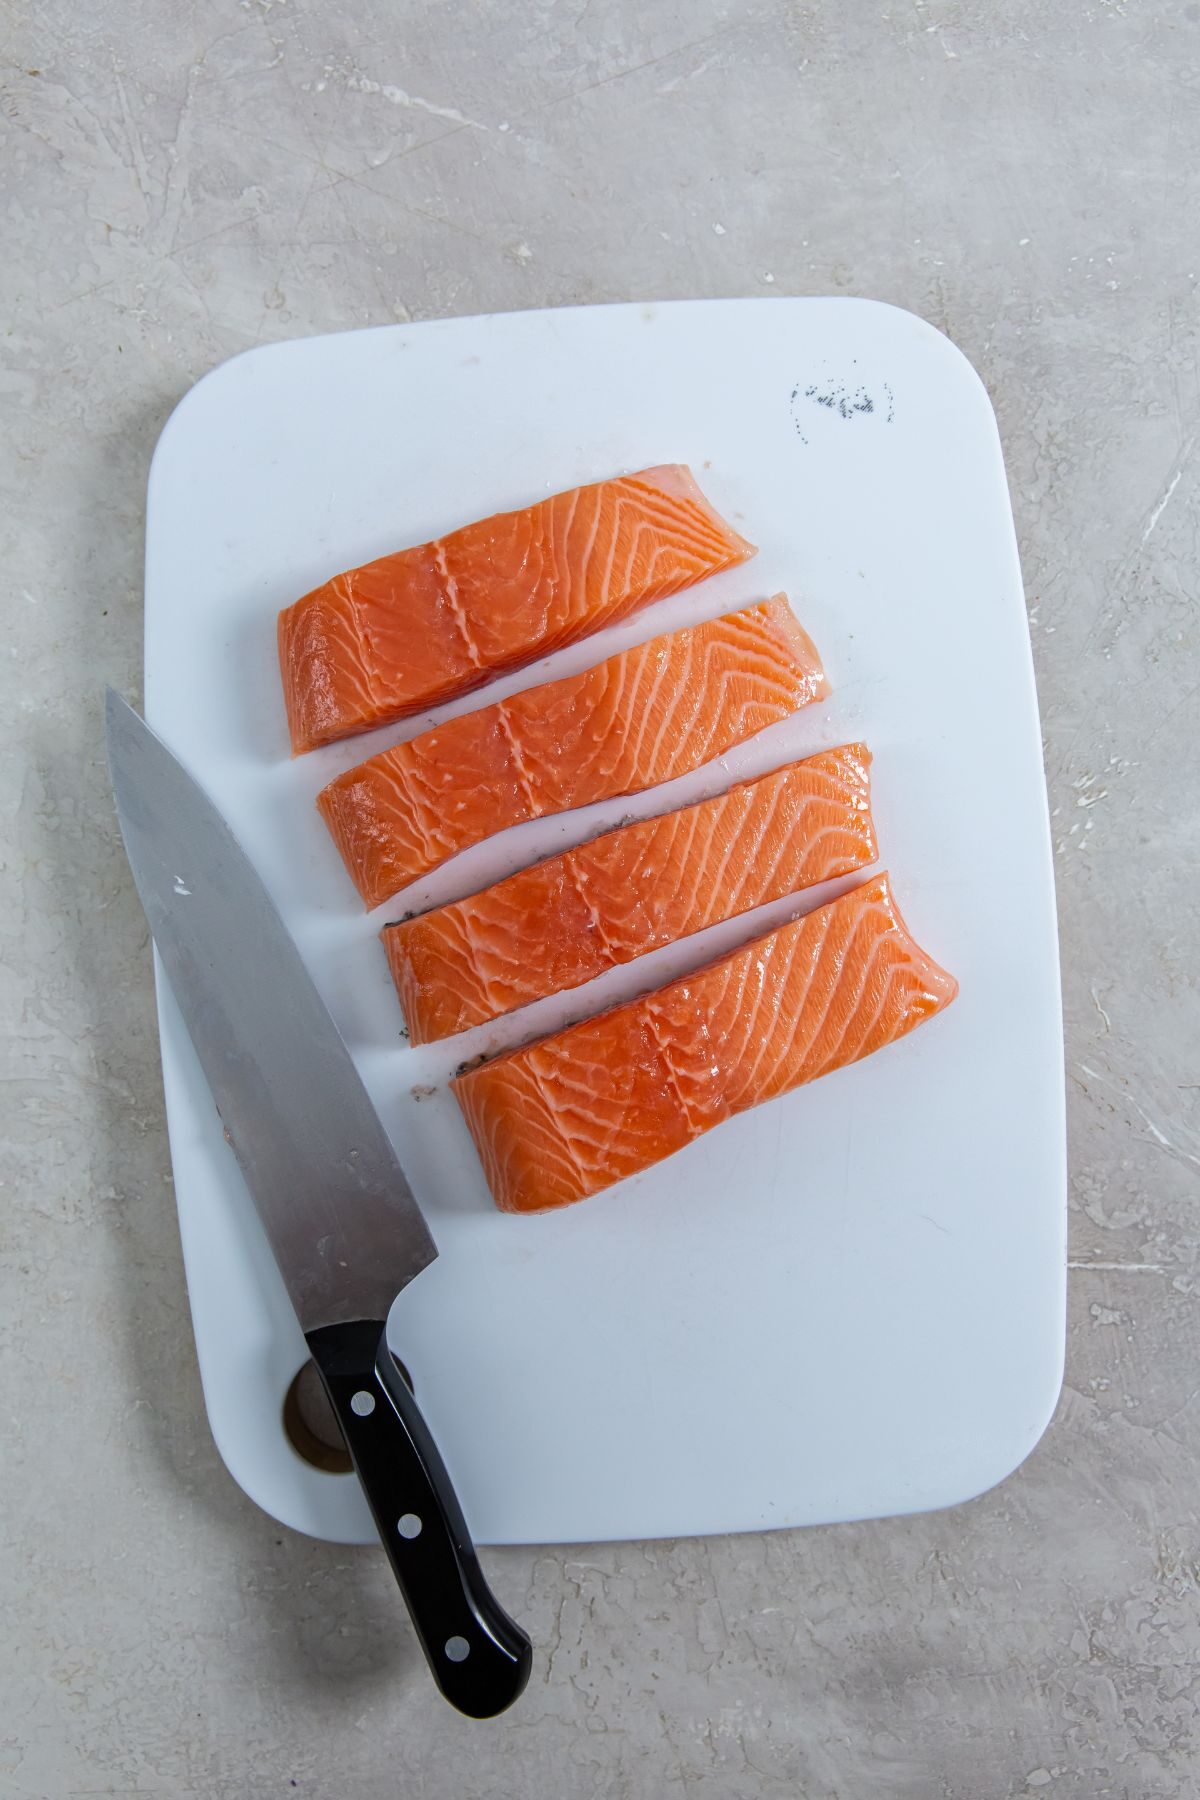 raw salmon on a cutting board sliced into four pieces with a knife on the side